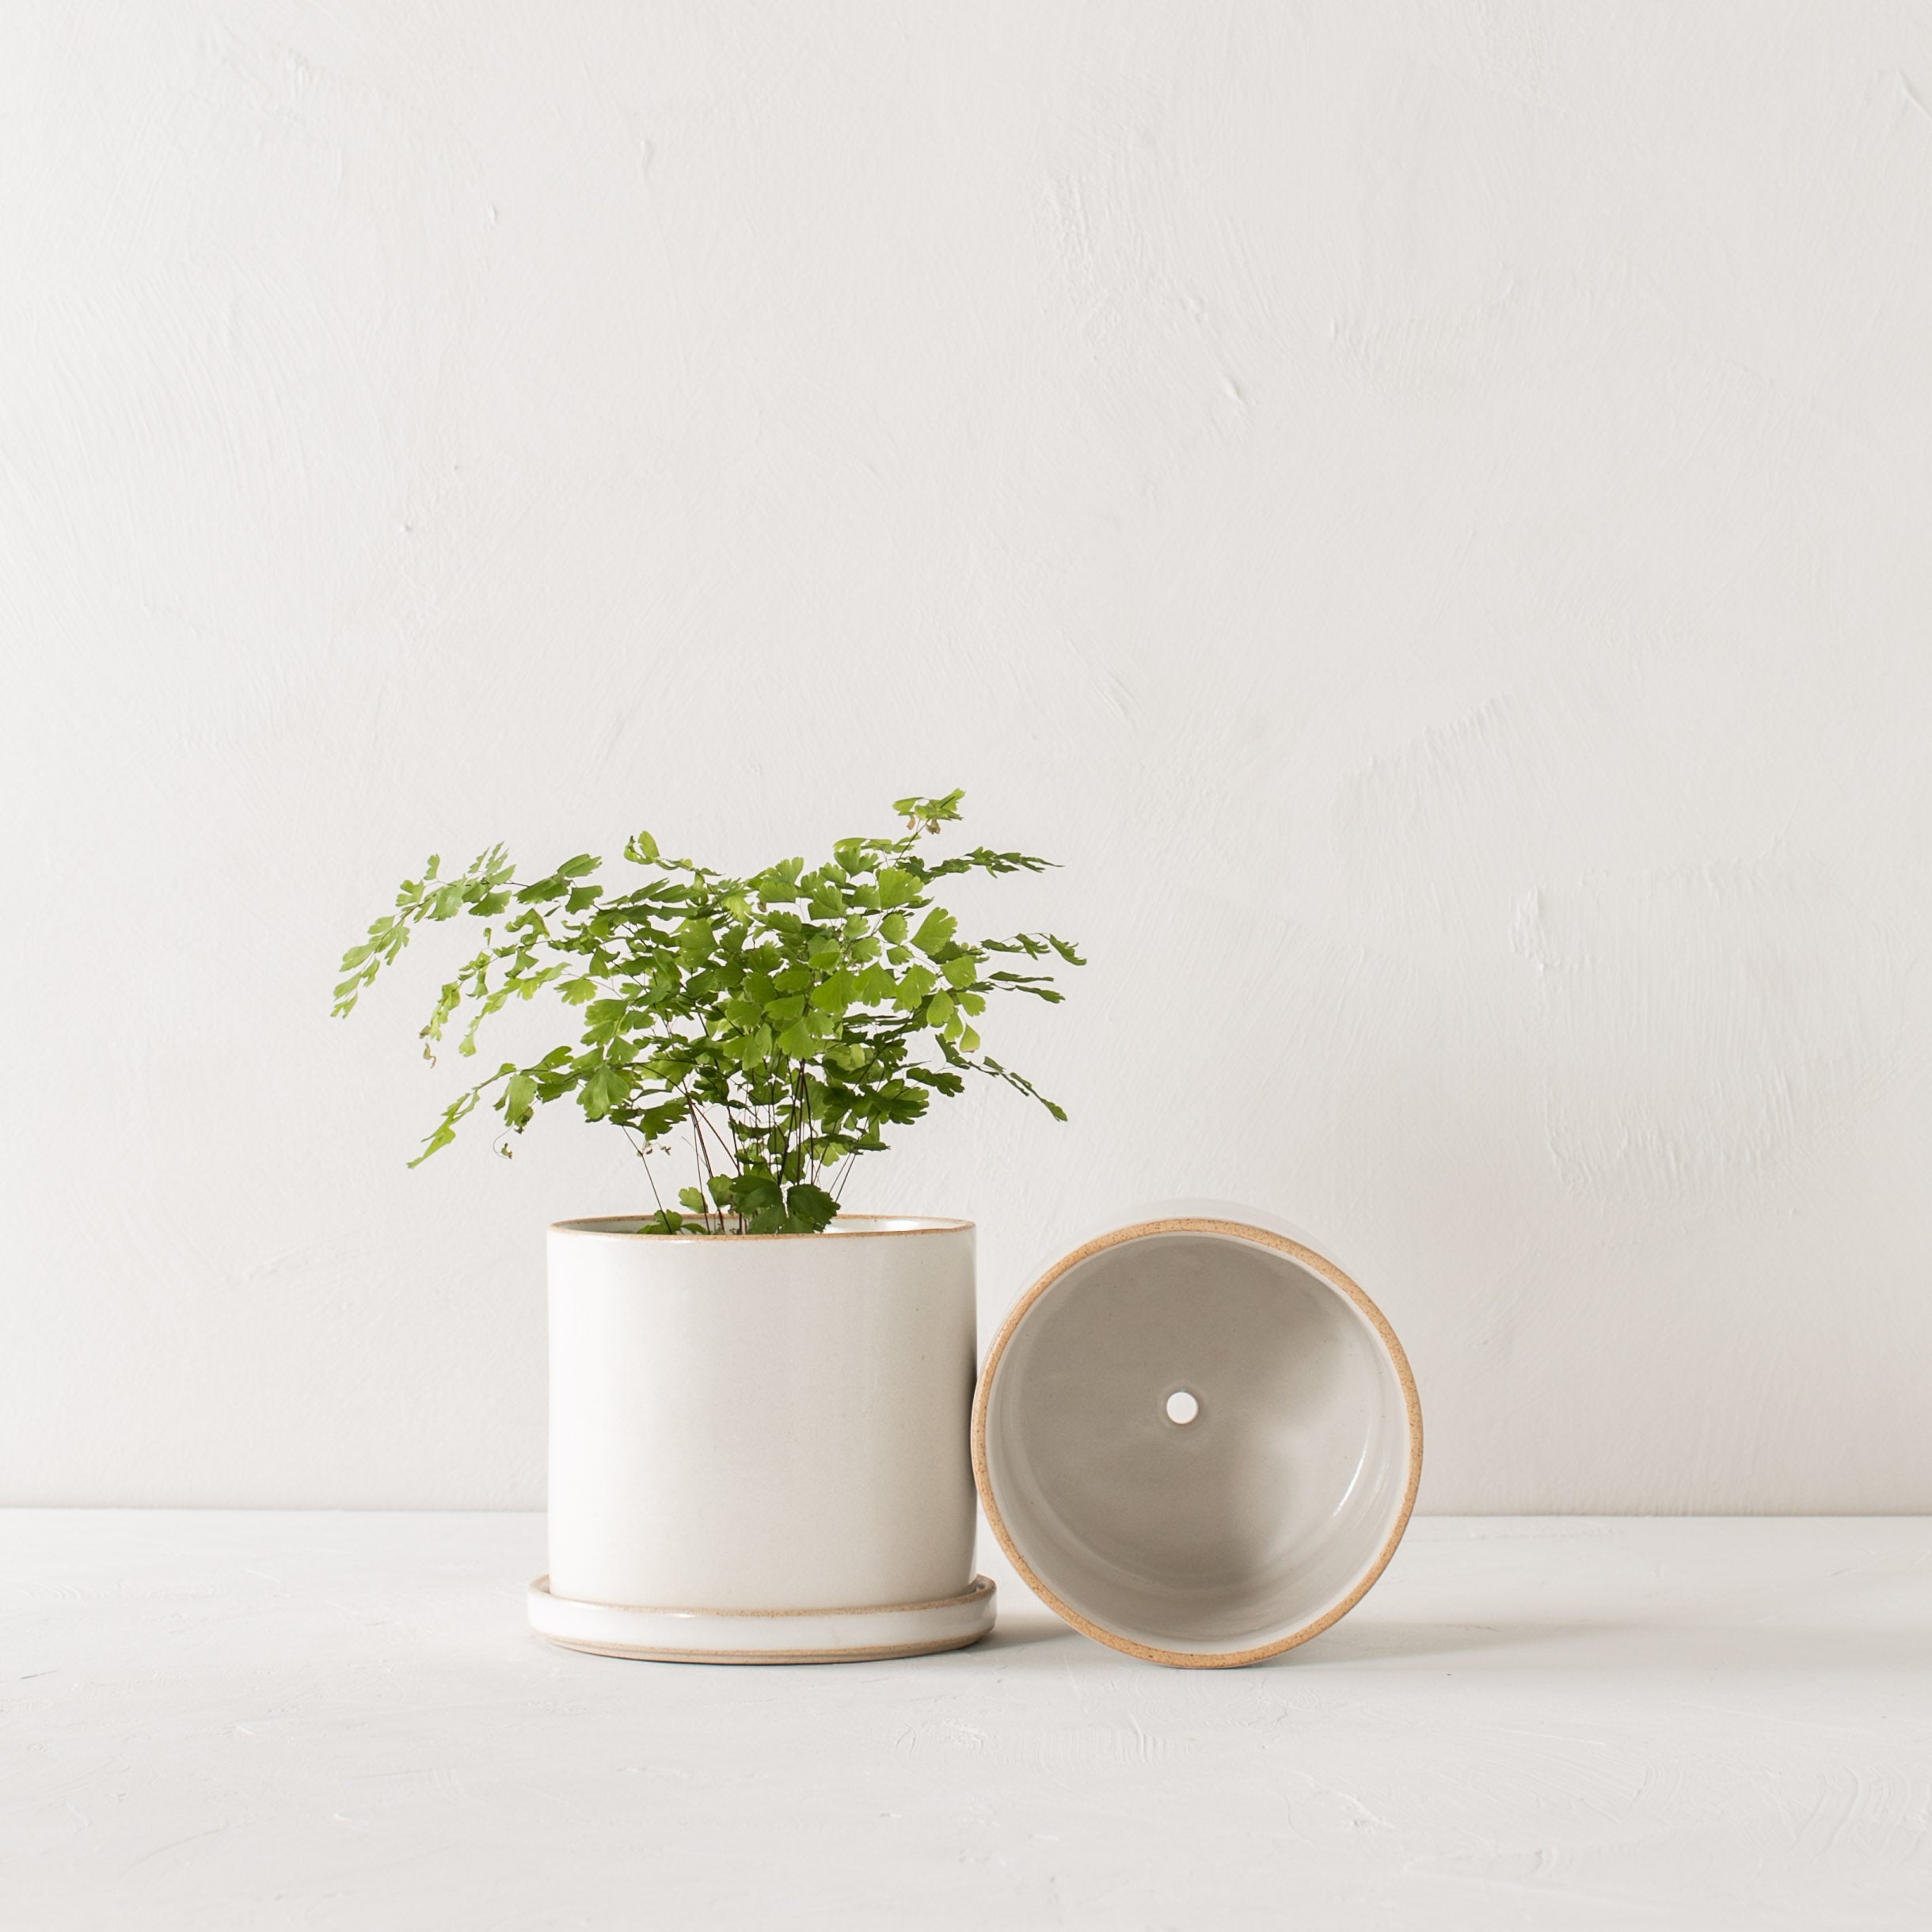 Two minimal white ceramic planters side by side. 6 inch planter and bottom dish stood upright, the other laying on its side to show off the drainage hole. Handmade ceramic planter, designed and sold by Convivial Production, Kansas City ceramics.